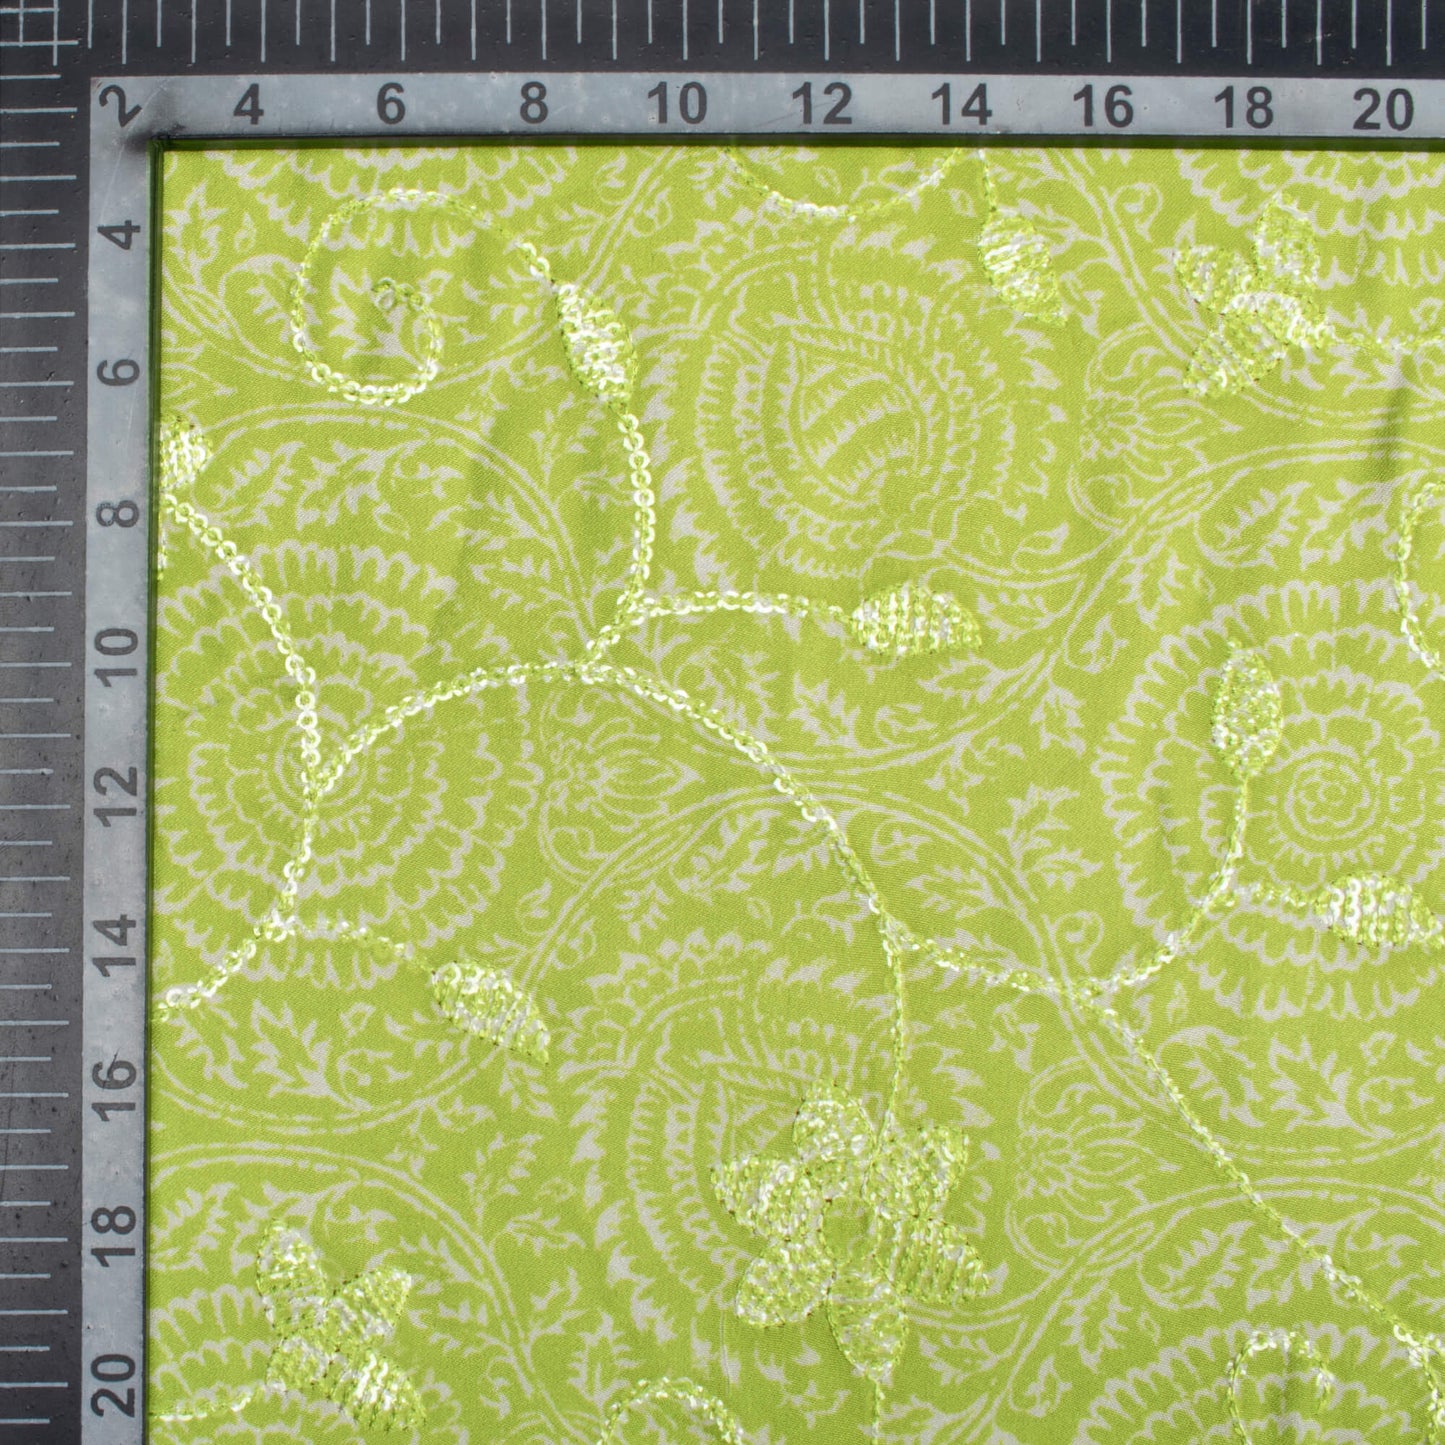 Pear Green And Off White Floral Pattern Digital Print Floral Sequins Embroidery Ultra Premium Butter Crepe Fabric